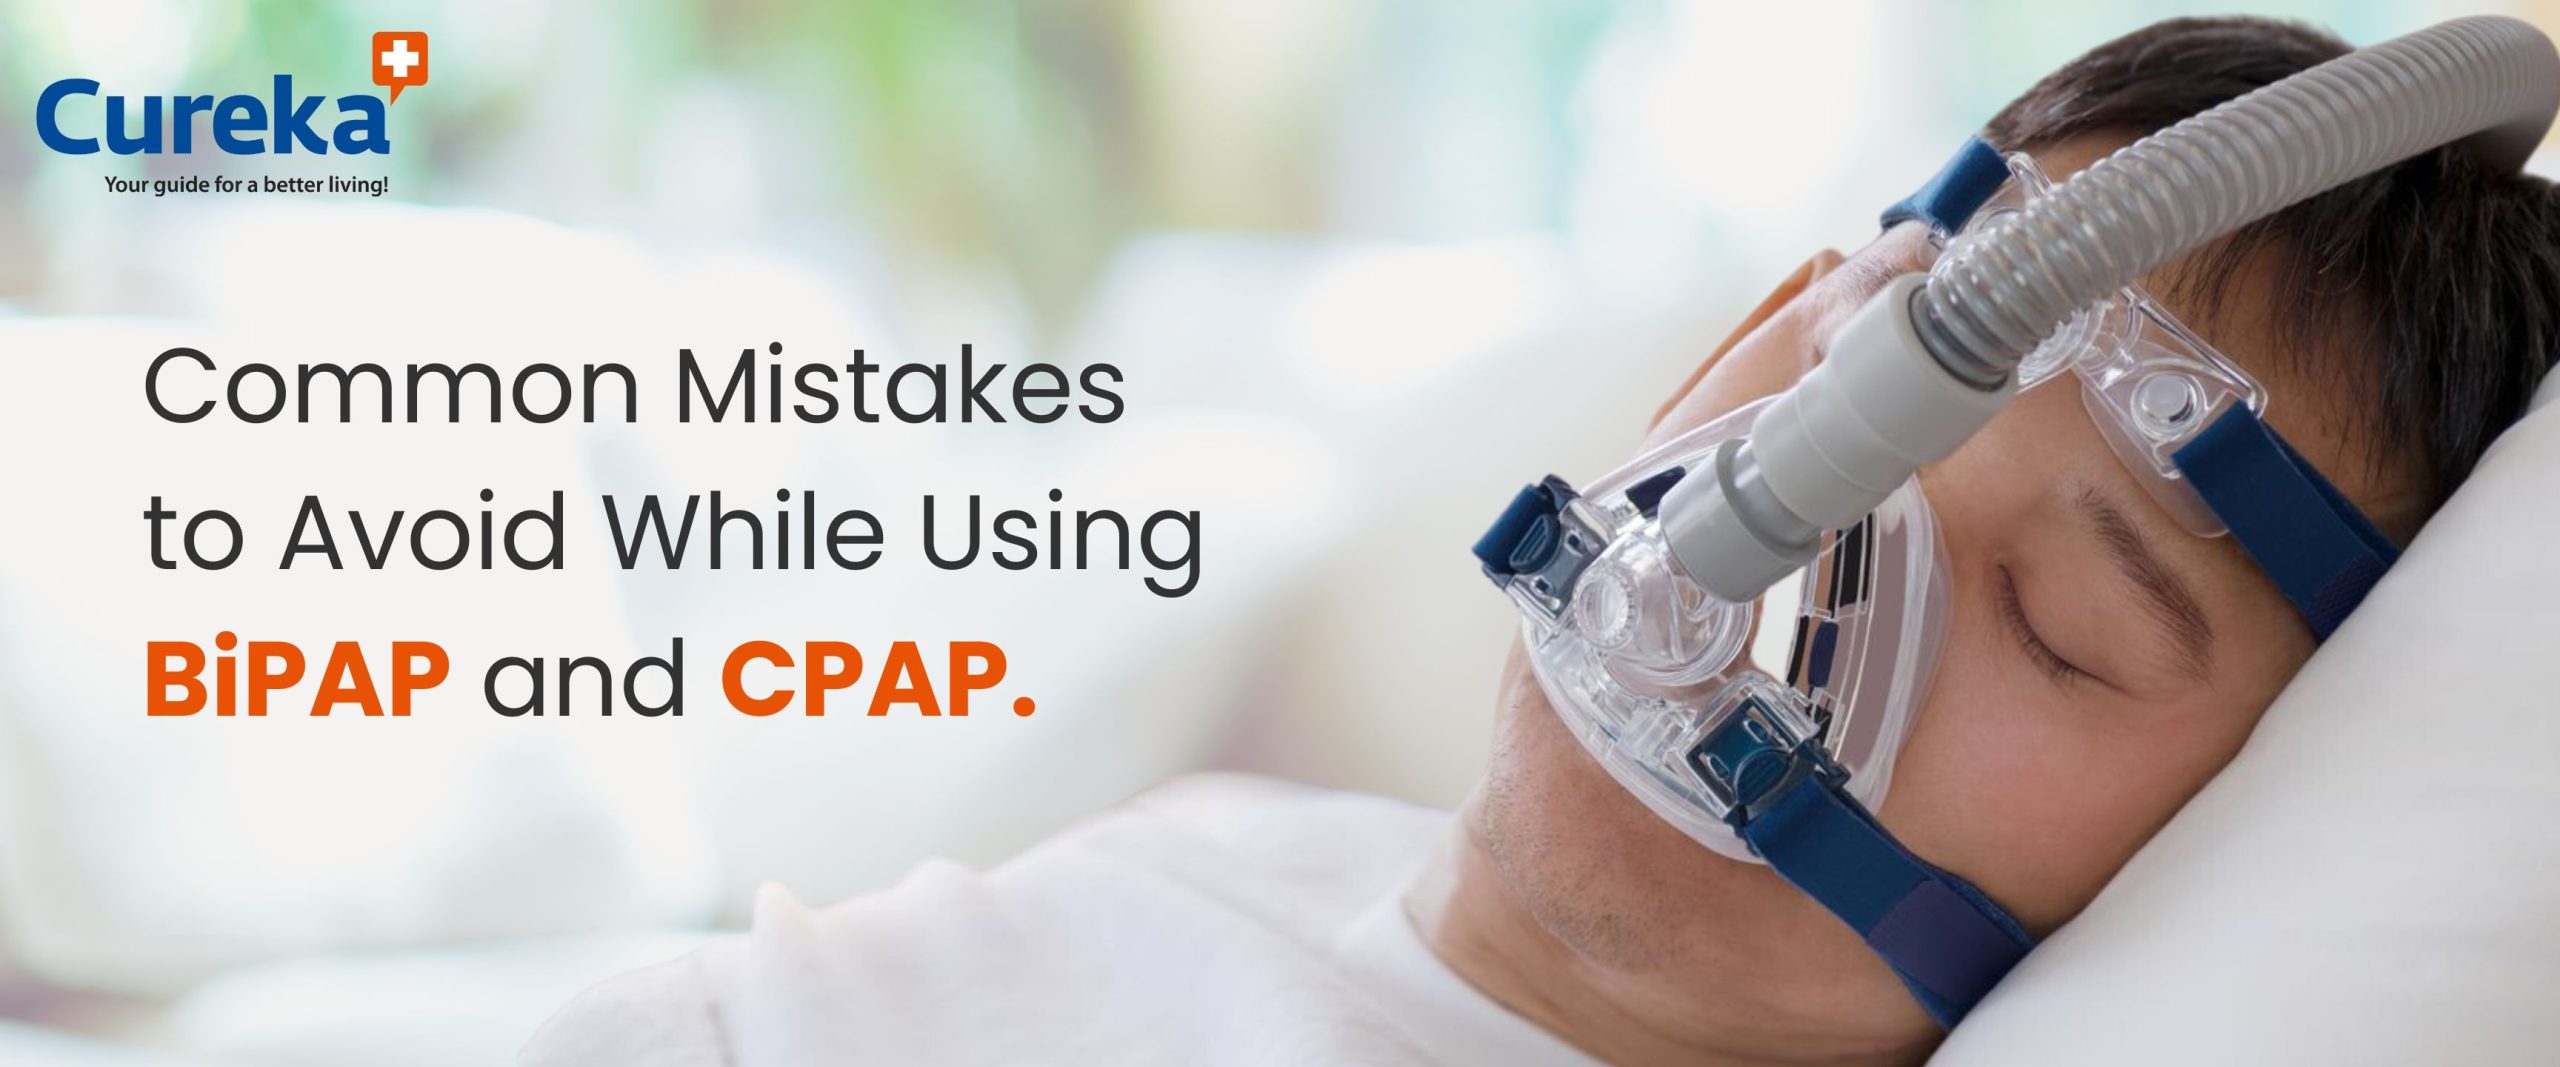 BiPAP and CPAP